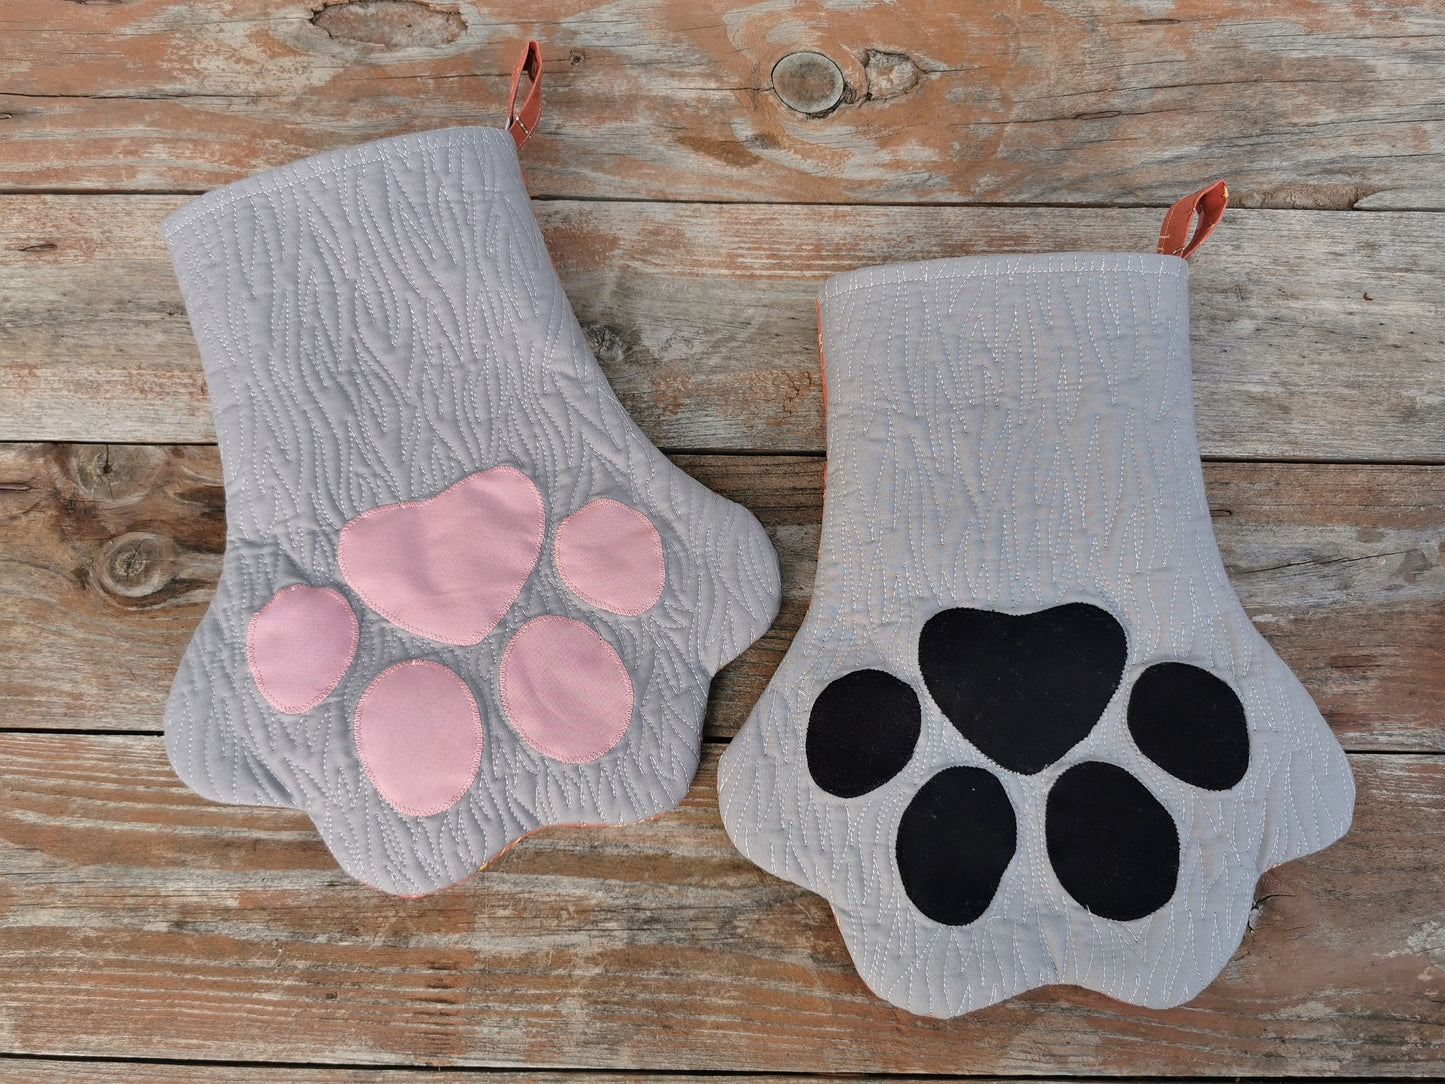 two gray paw stockings, showing both the pink and black toe options. Notice the fur like quilting that gives interesting detail.